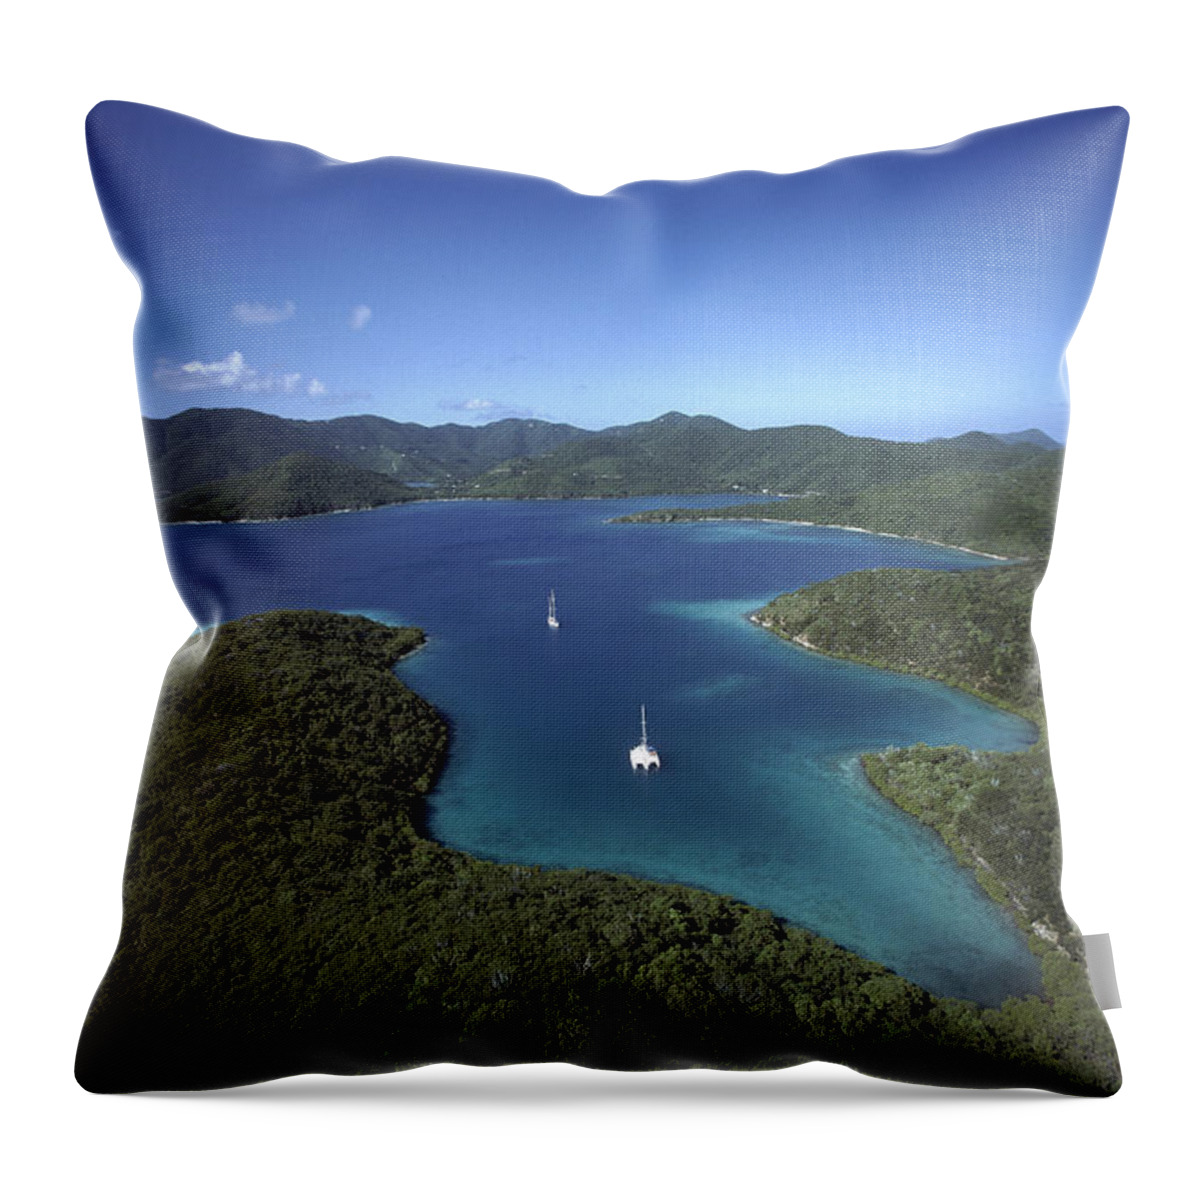 Mp Throw Pillow featuring the photograph Aerial View Of Hurricane Bay, Virgin by Gerry Ellis